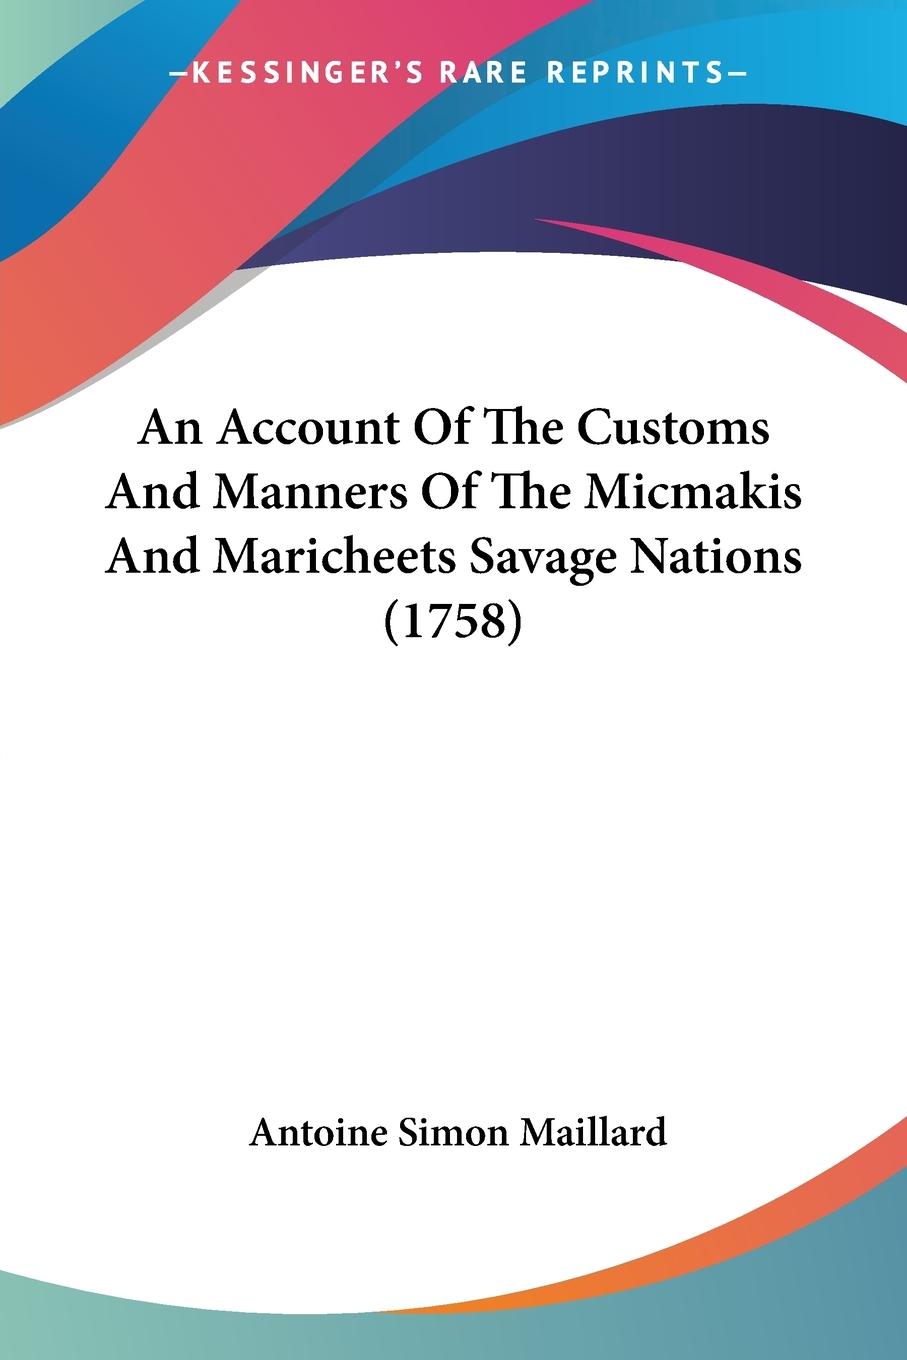 An Account Of The Customs And Manners Of The Micmakis And Maricheets Savage Nations (1758) - Maillard, Antoine Simon